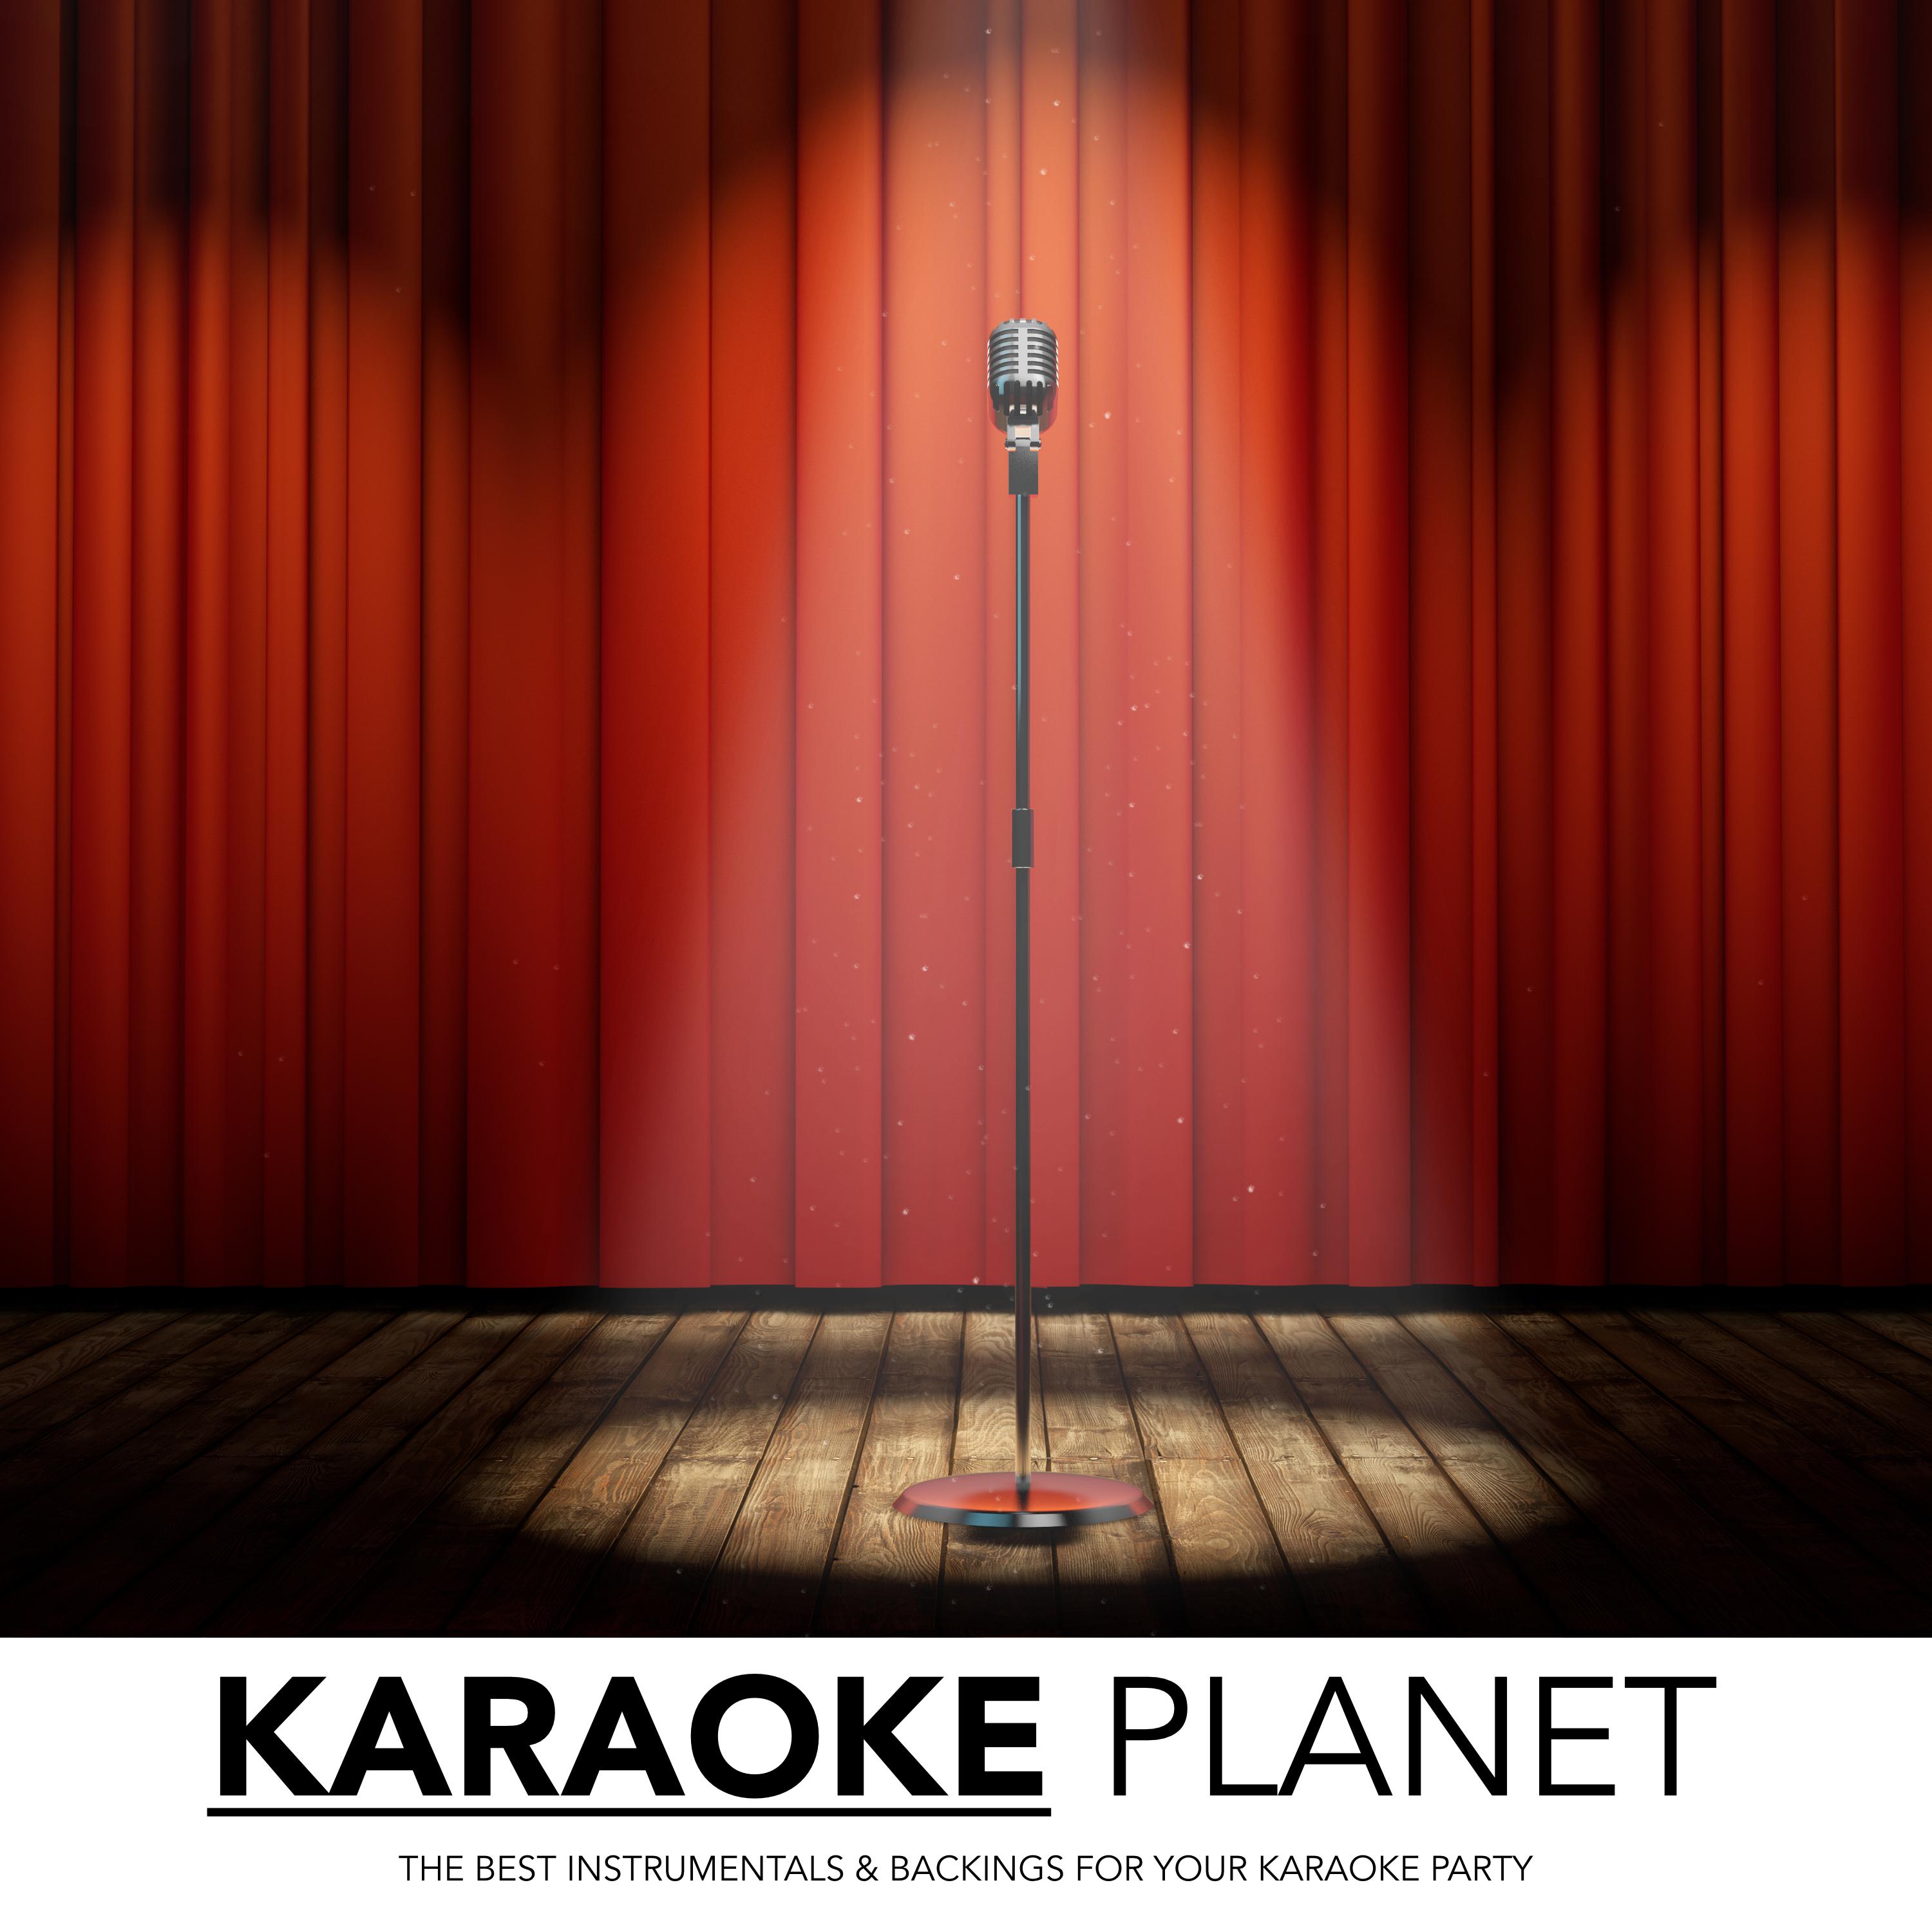 Tight Fittin' Jeans (Karaoke Version) [Originally Performed By Conway Twitty]